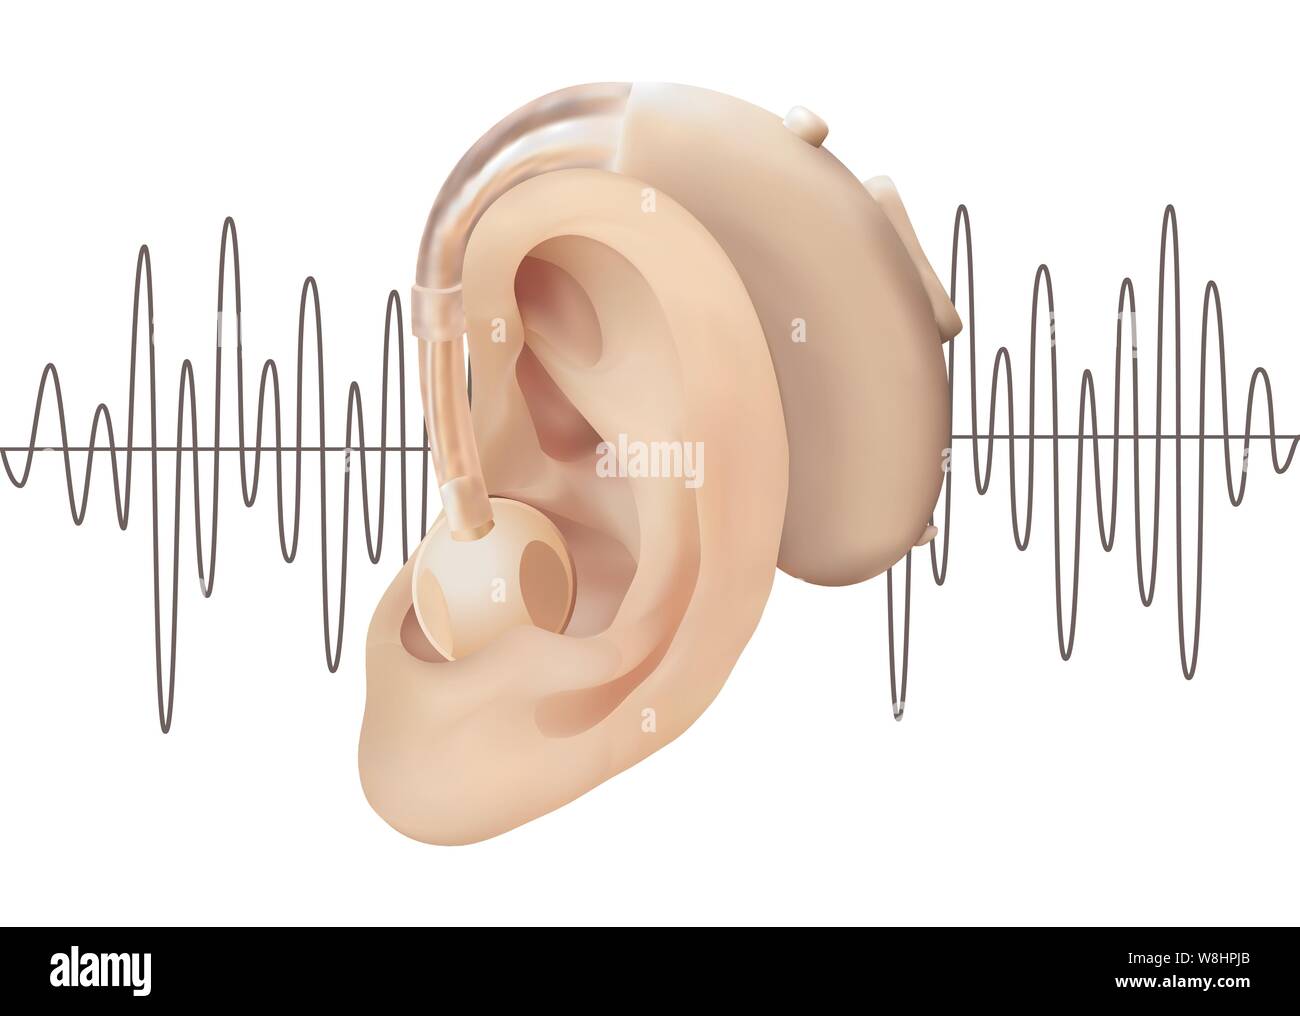 Digital hearing aid behind the ear, on the background of sound wave diagram. Treatment and prosthetics of hearing loss in otolaryngology. Realistic Stock Vector